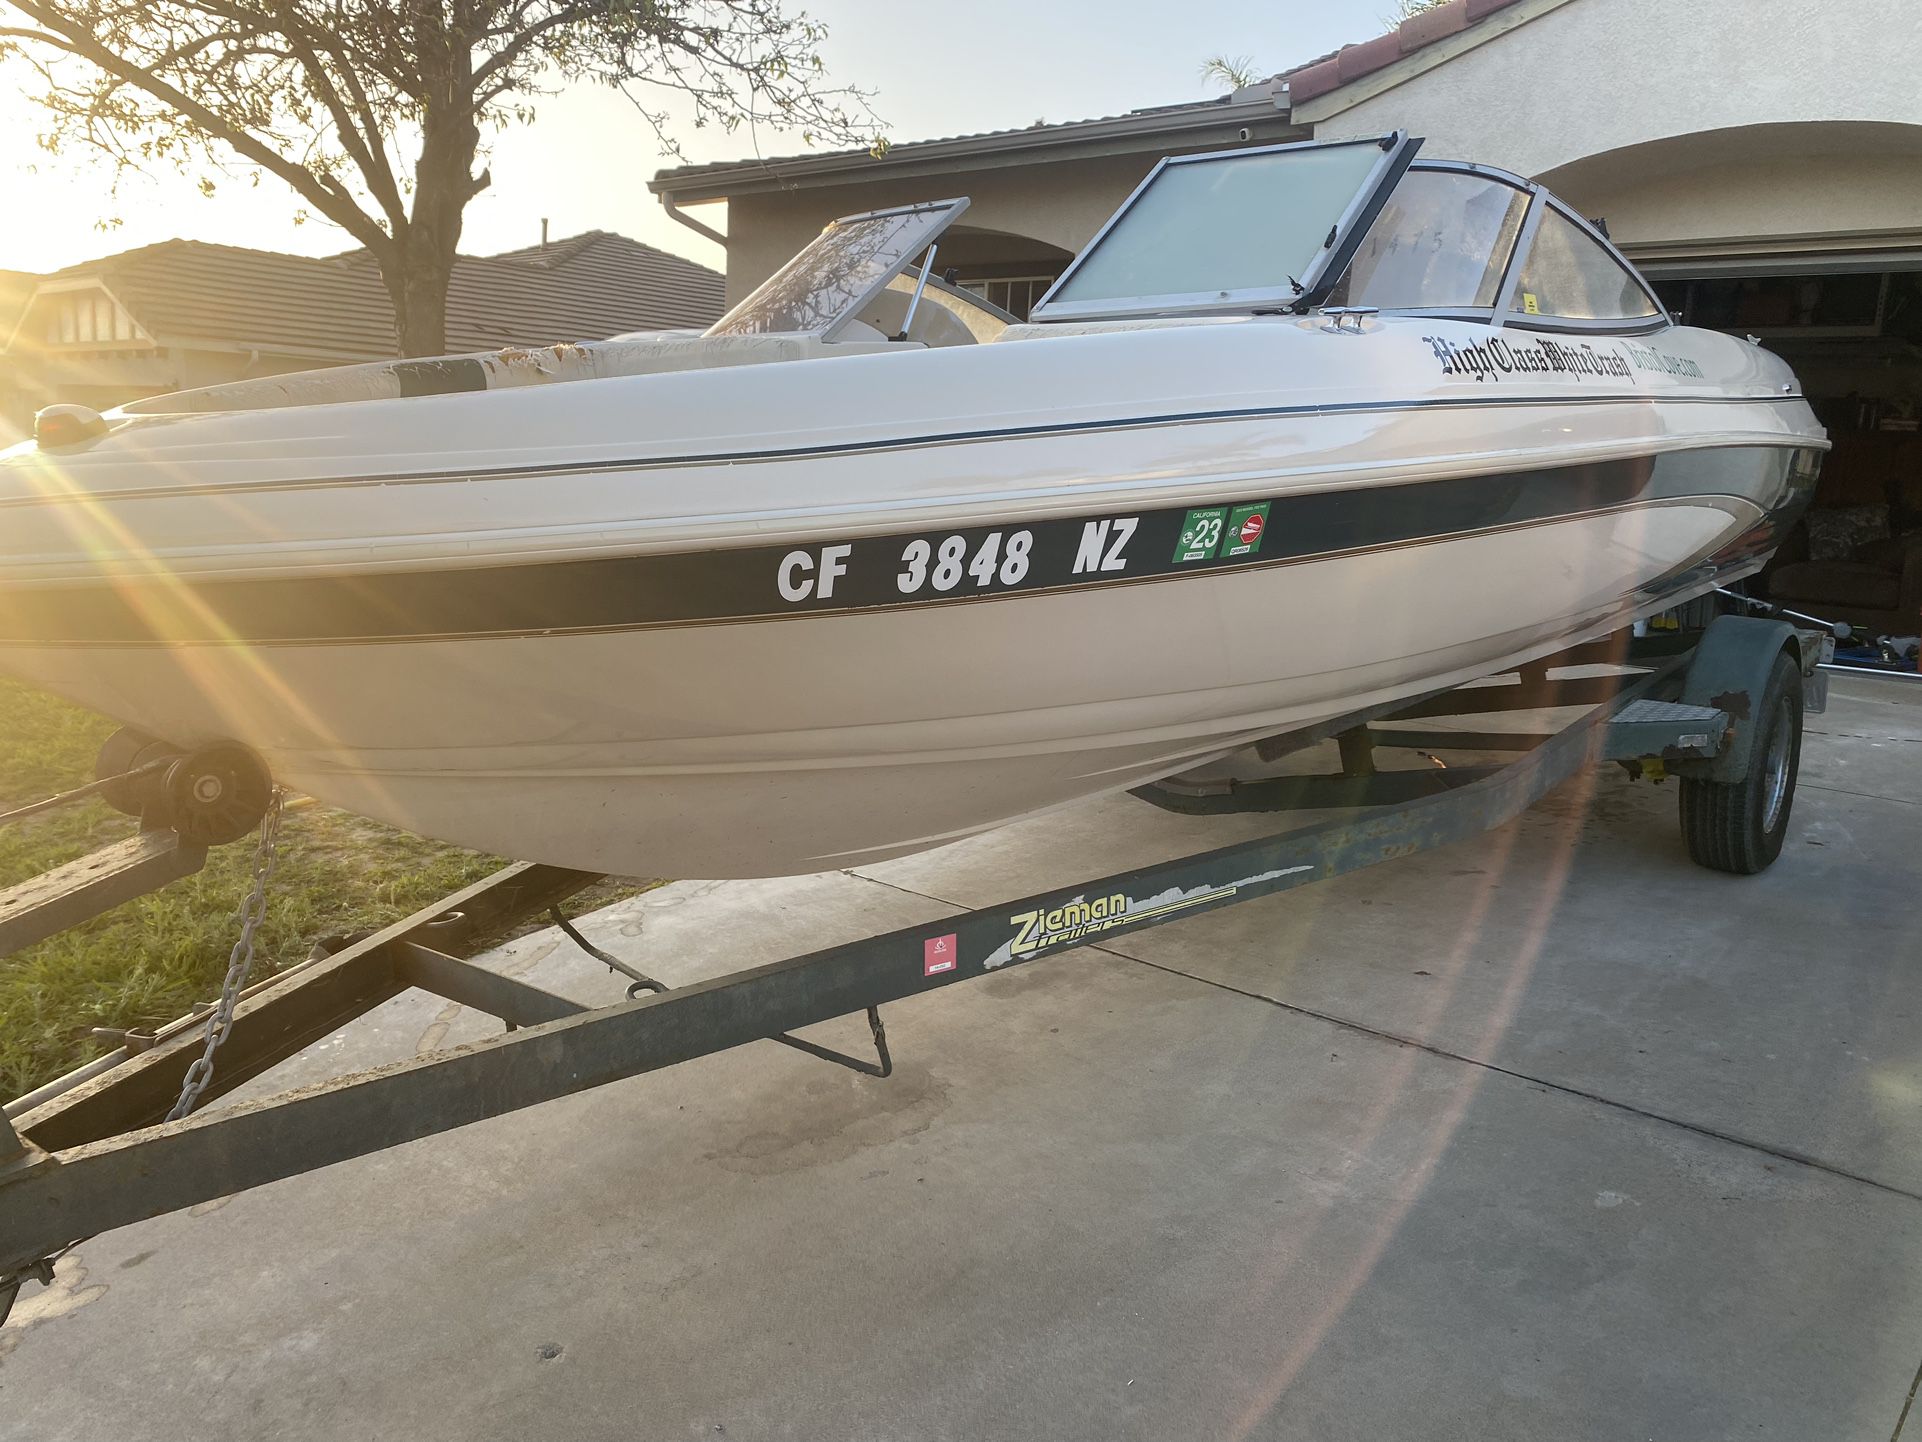 1997 Glastron Boat 19 Foot